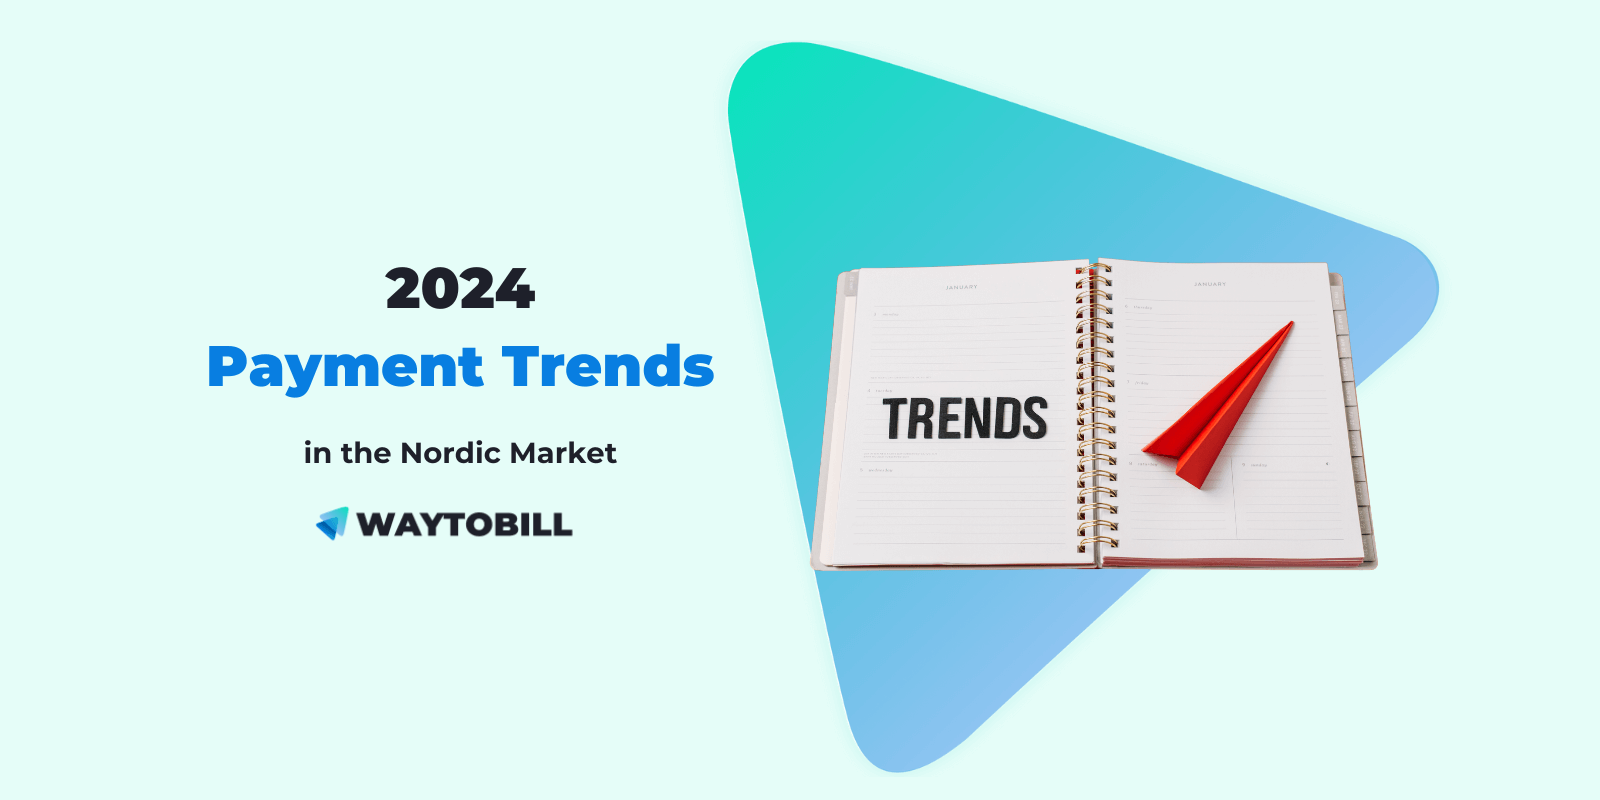 2024 Payment Trends in the Nordics: What to Look Out For